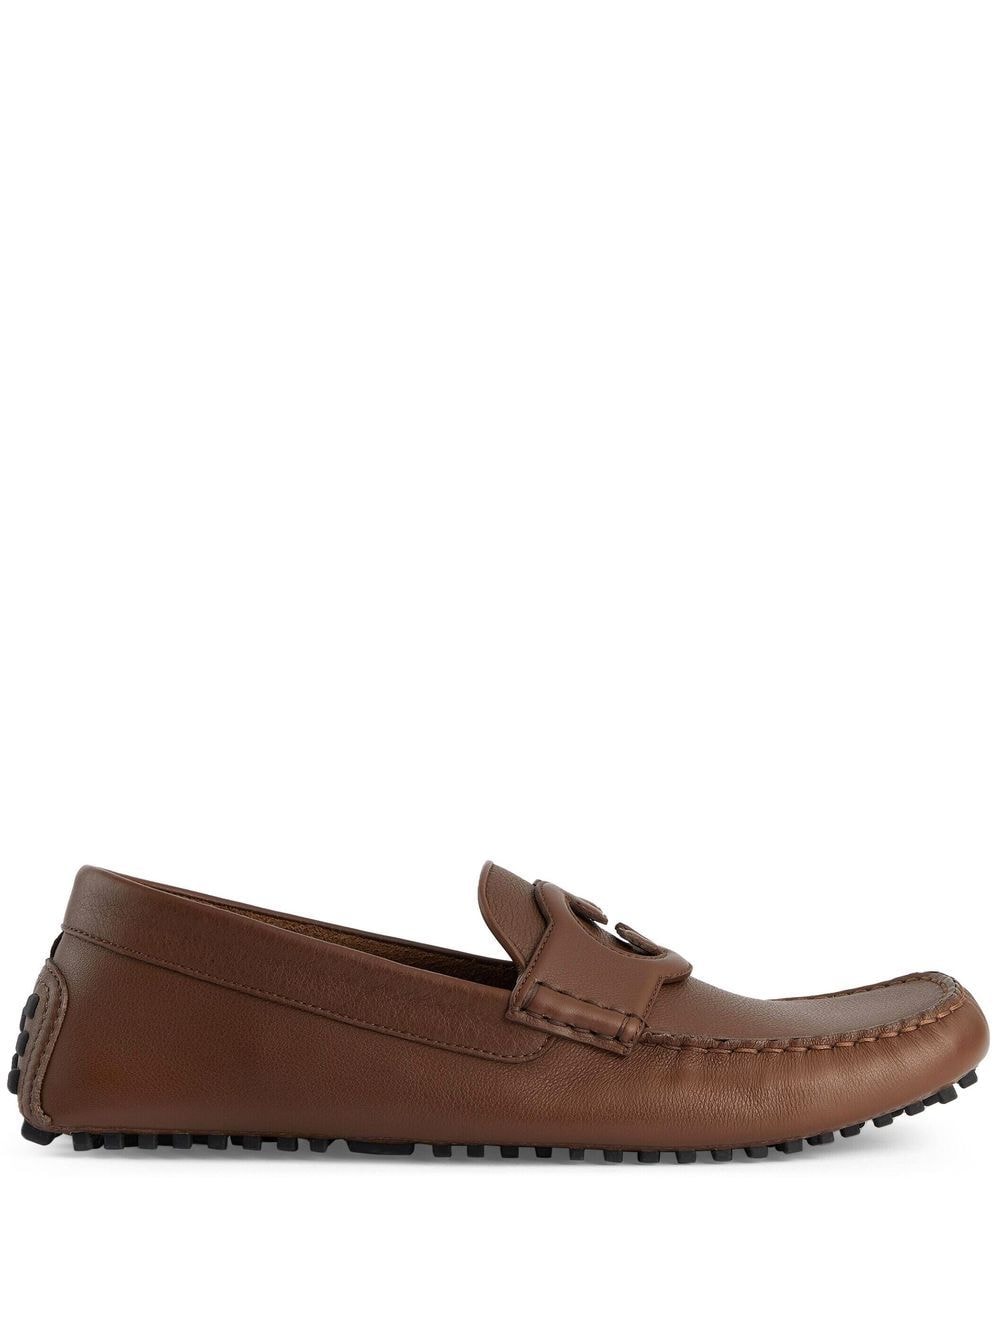 Gucci Interlocking G Driving Shoes In Brown